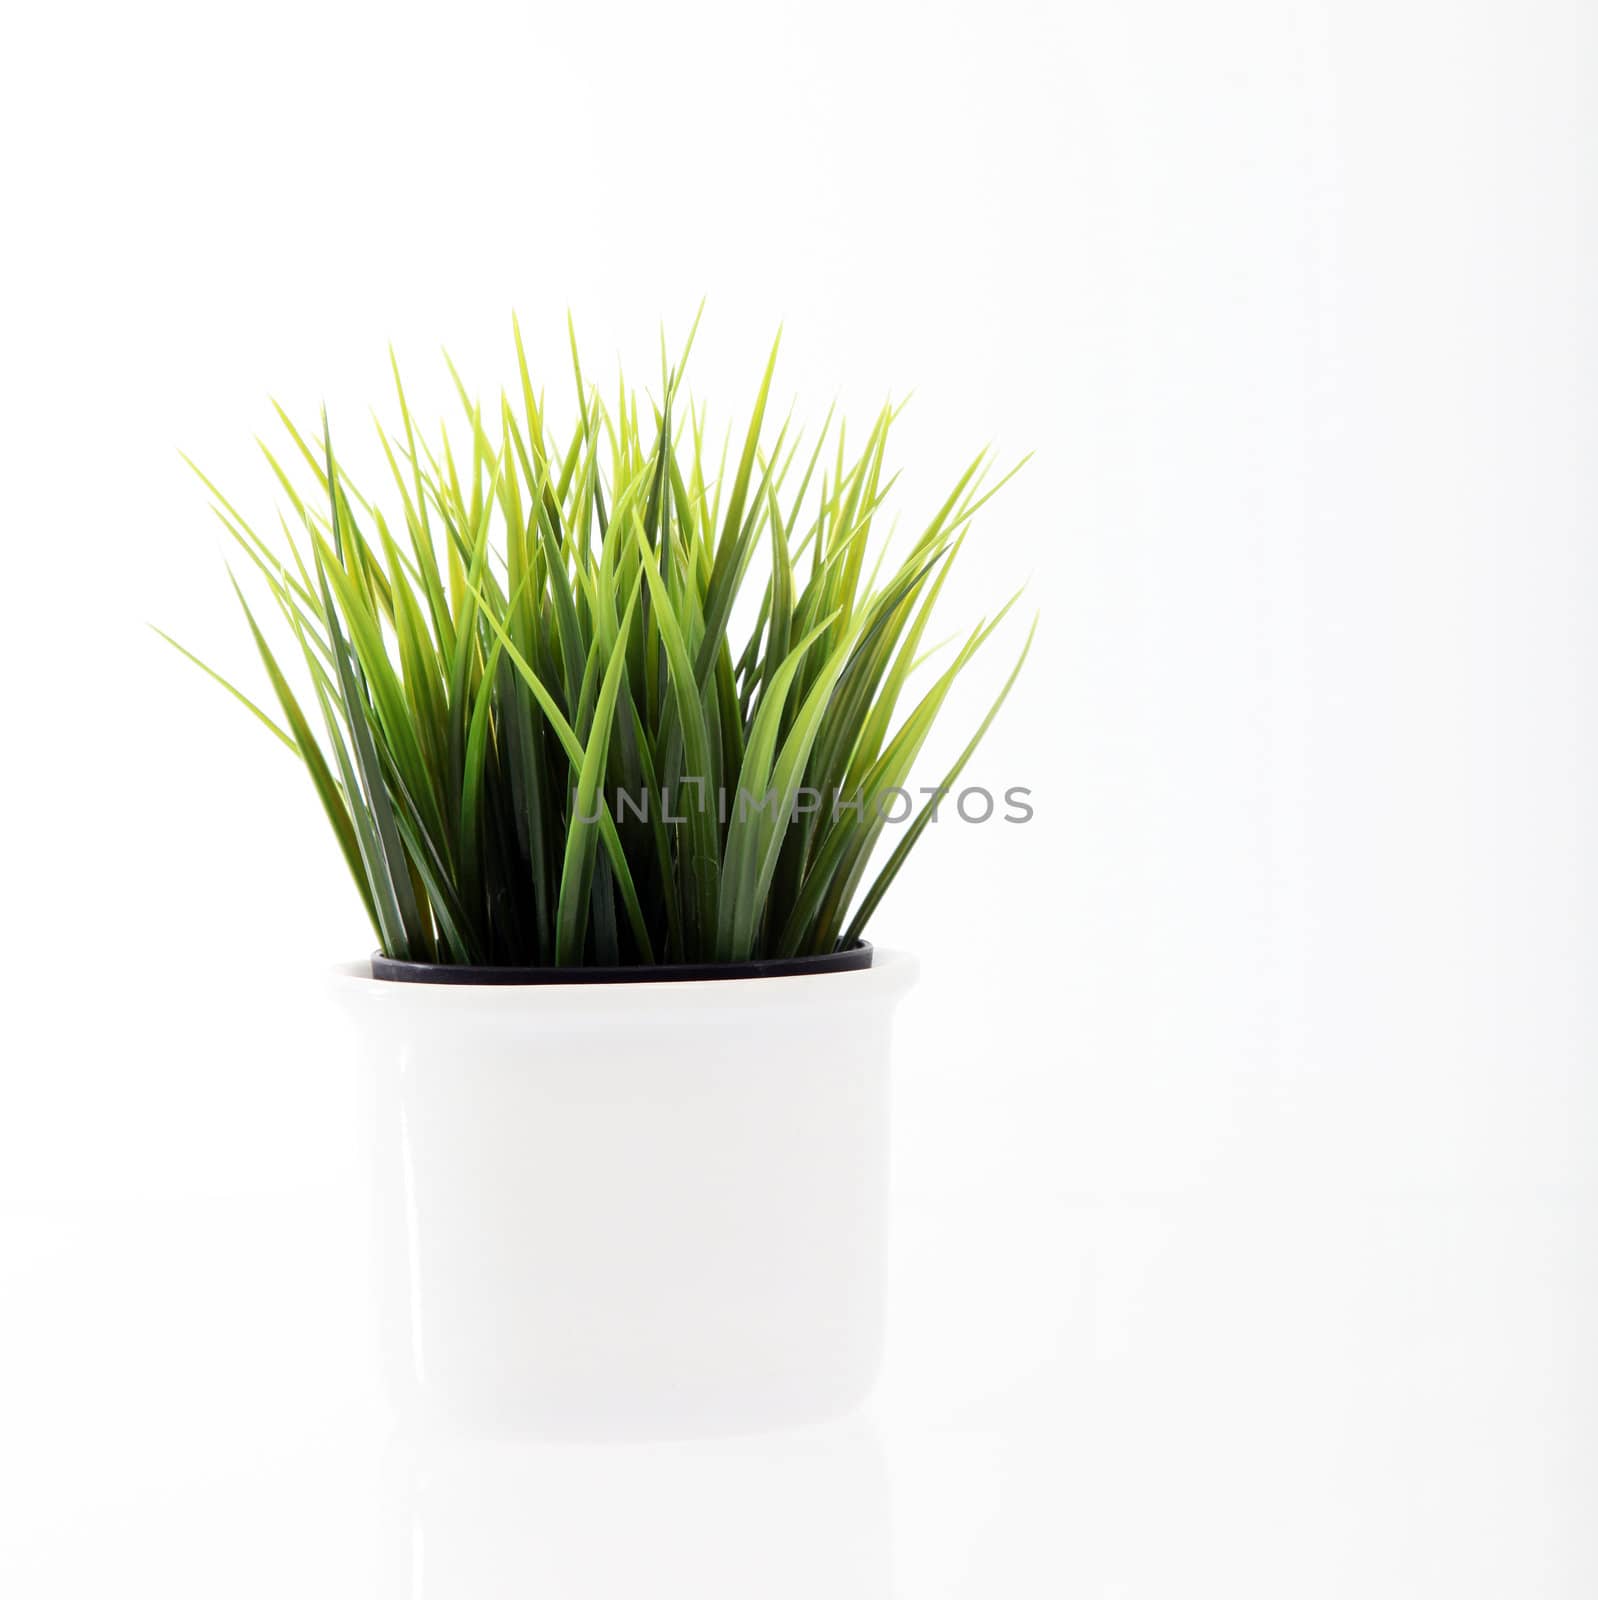 A blank white pot with lush green growth of young grass isolated on white in a wellbeing, health and ecology concept